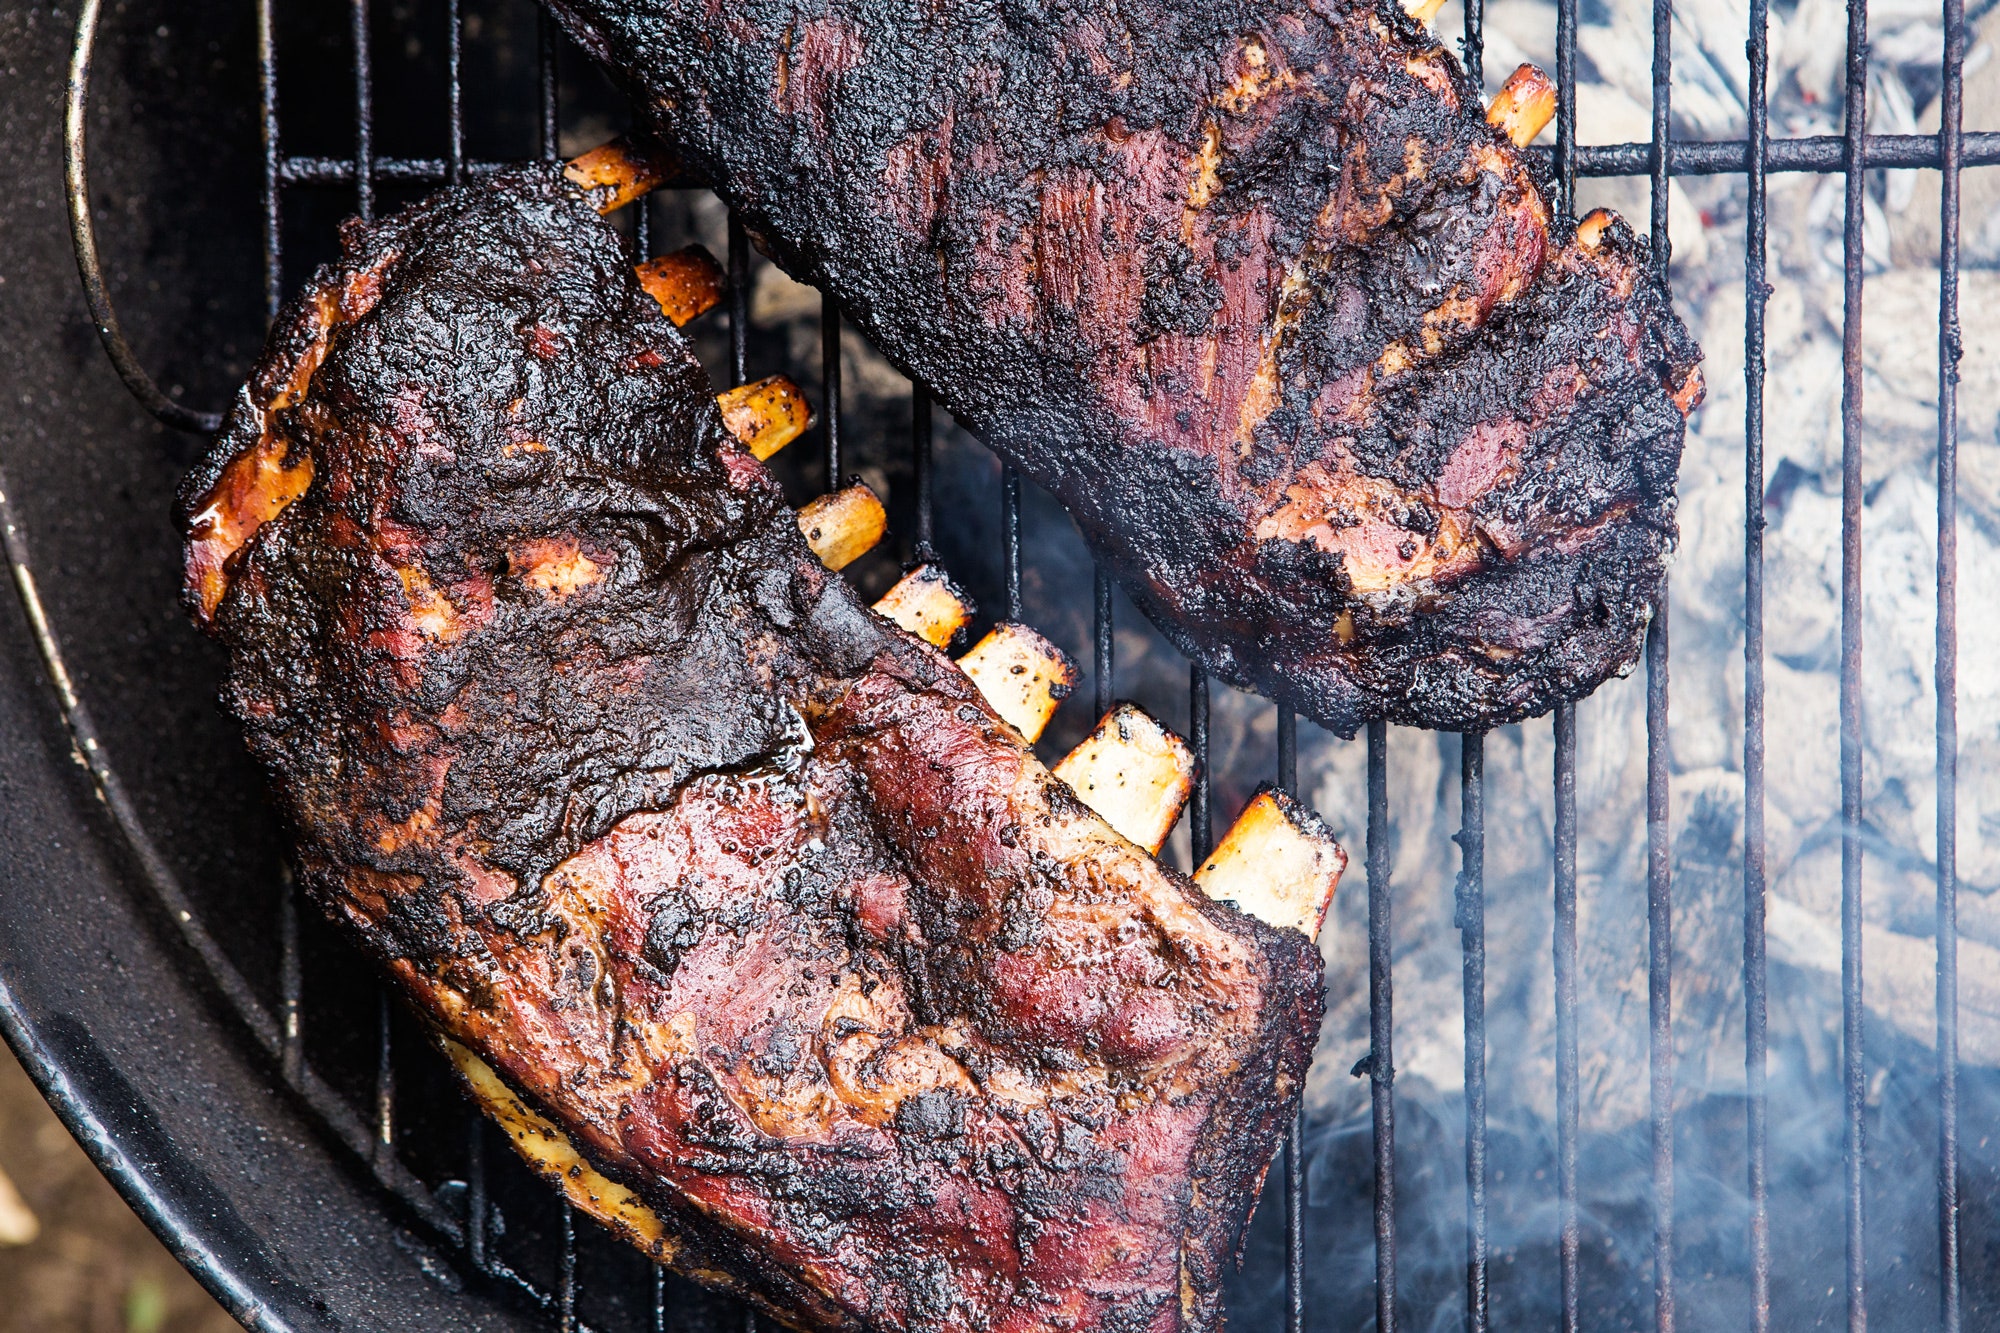 How to season a new smoker grill
